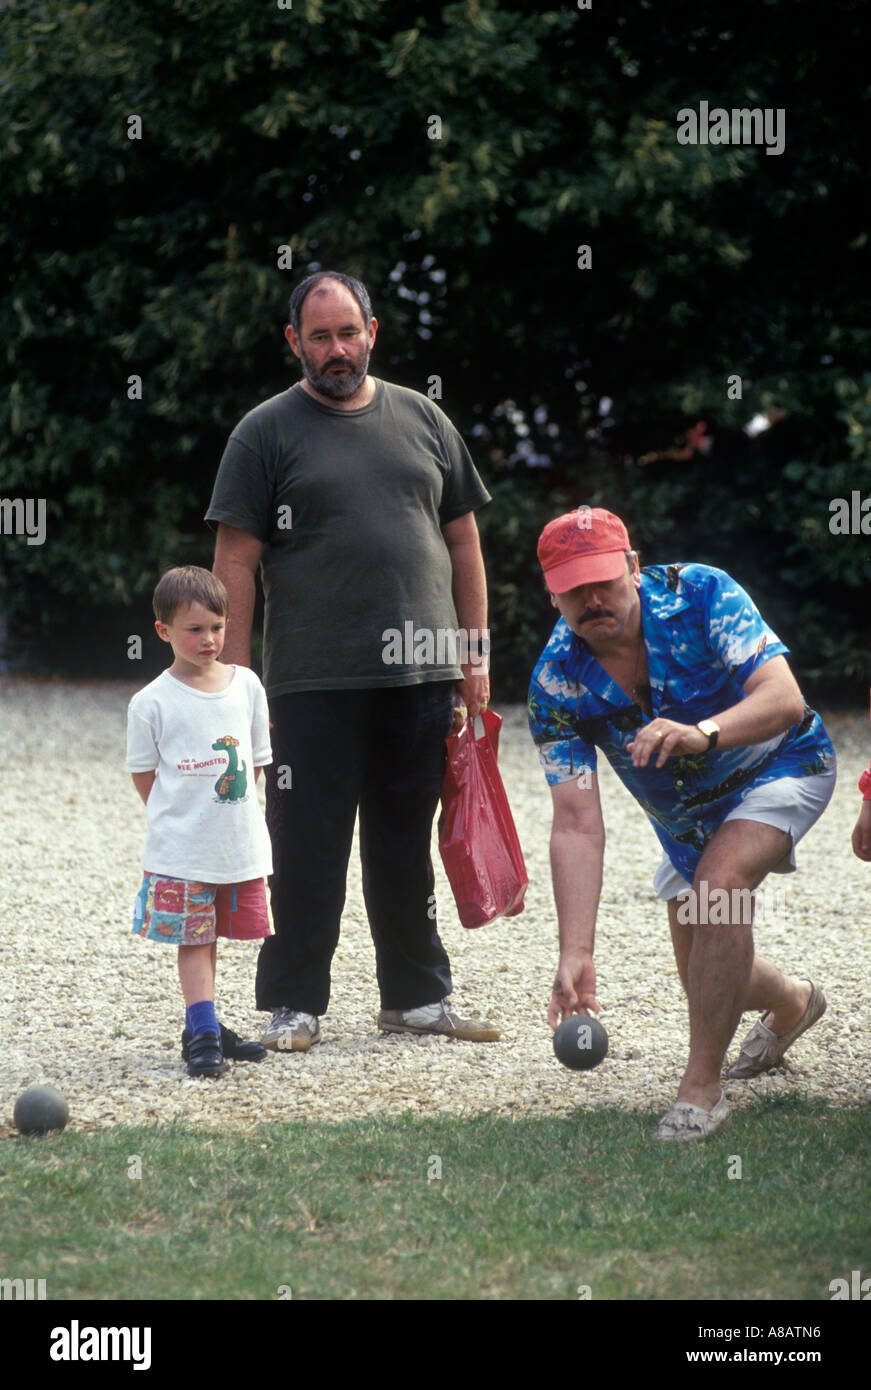 Playing bowls 1990s UK village fete Eastleach Turville Gloucestershire England  1993 HOMER SYKES Stock Photo